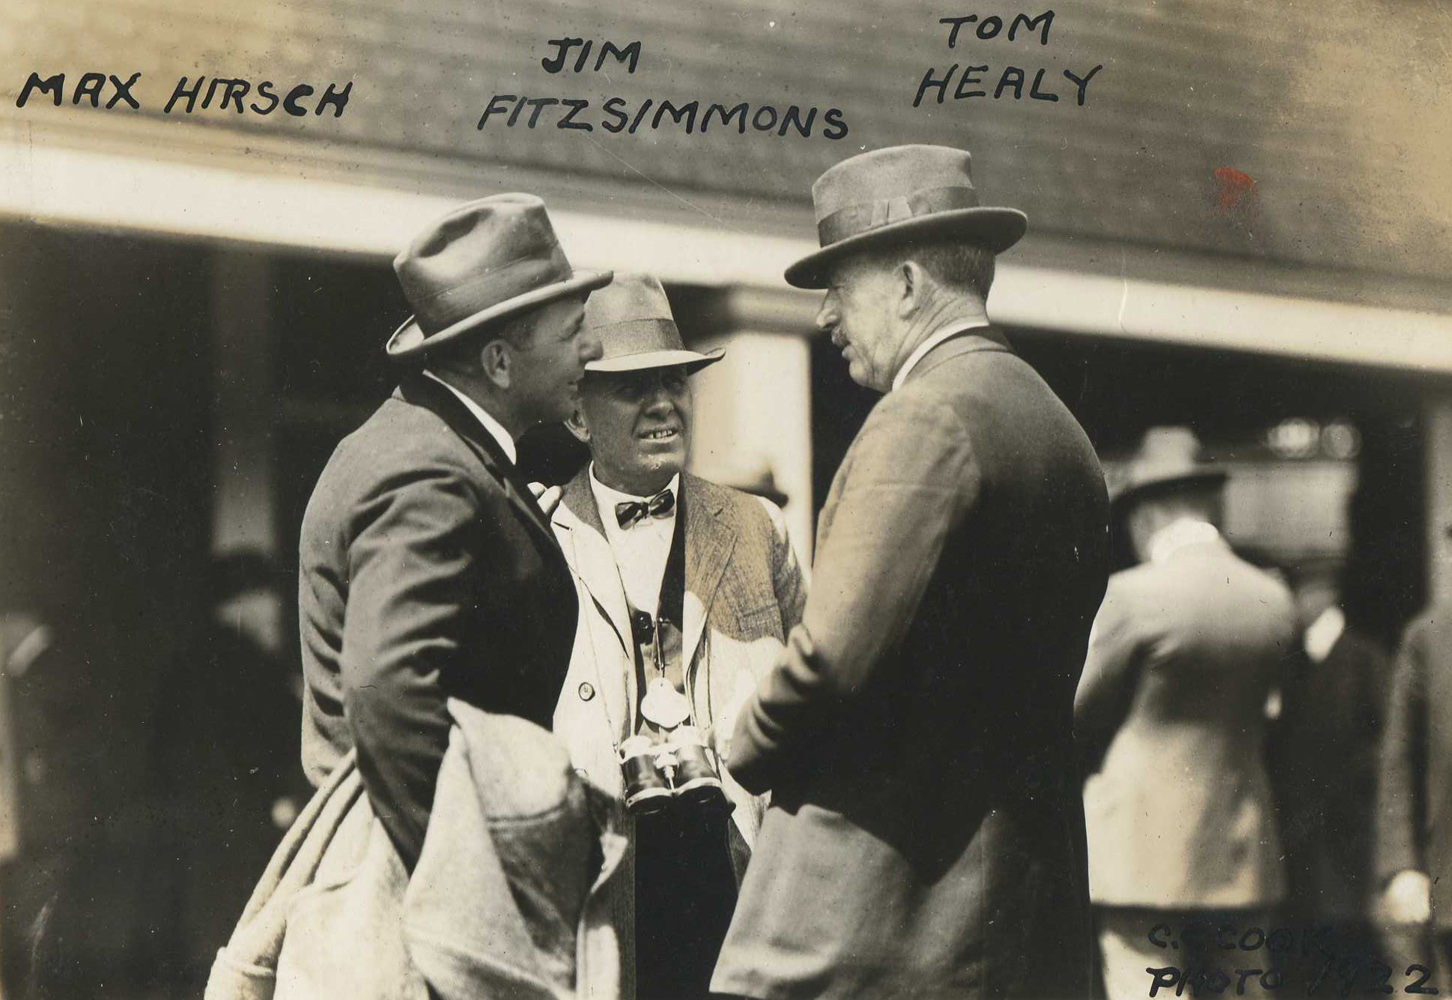 A young James "Sunny Jim" Fiitzsimmons (center) with fellow future Hall of Fame trainers Max Hirsch and T. J. Healey in 1922 (C. C. Cook/Museum Collection)